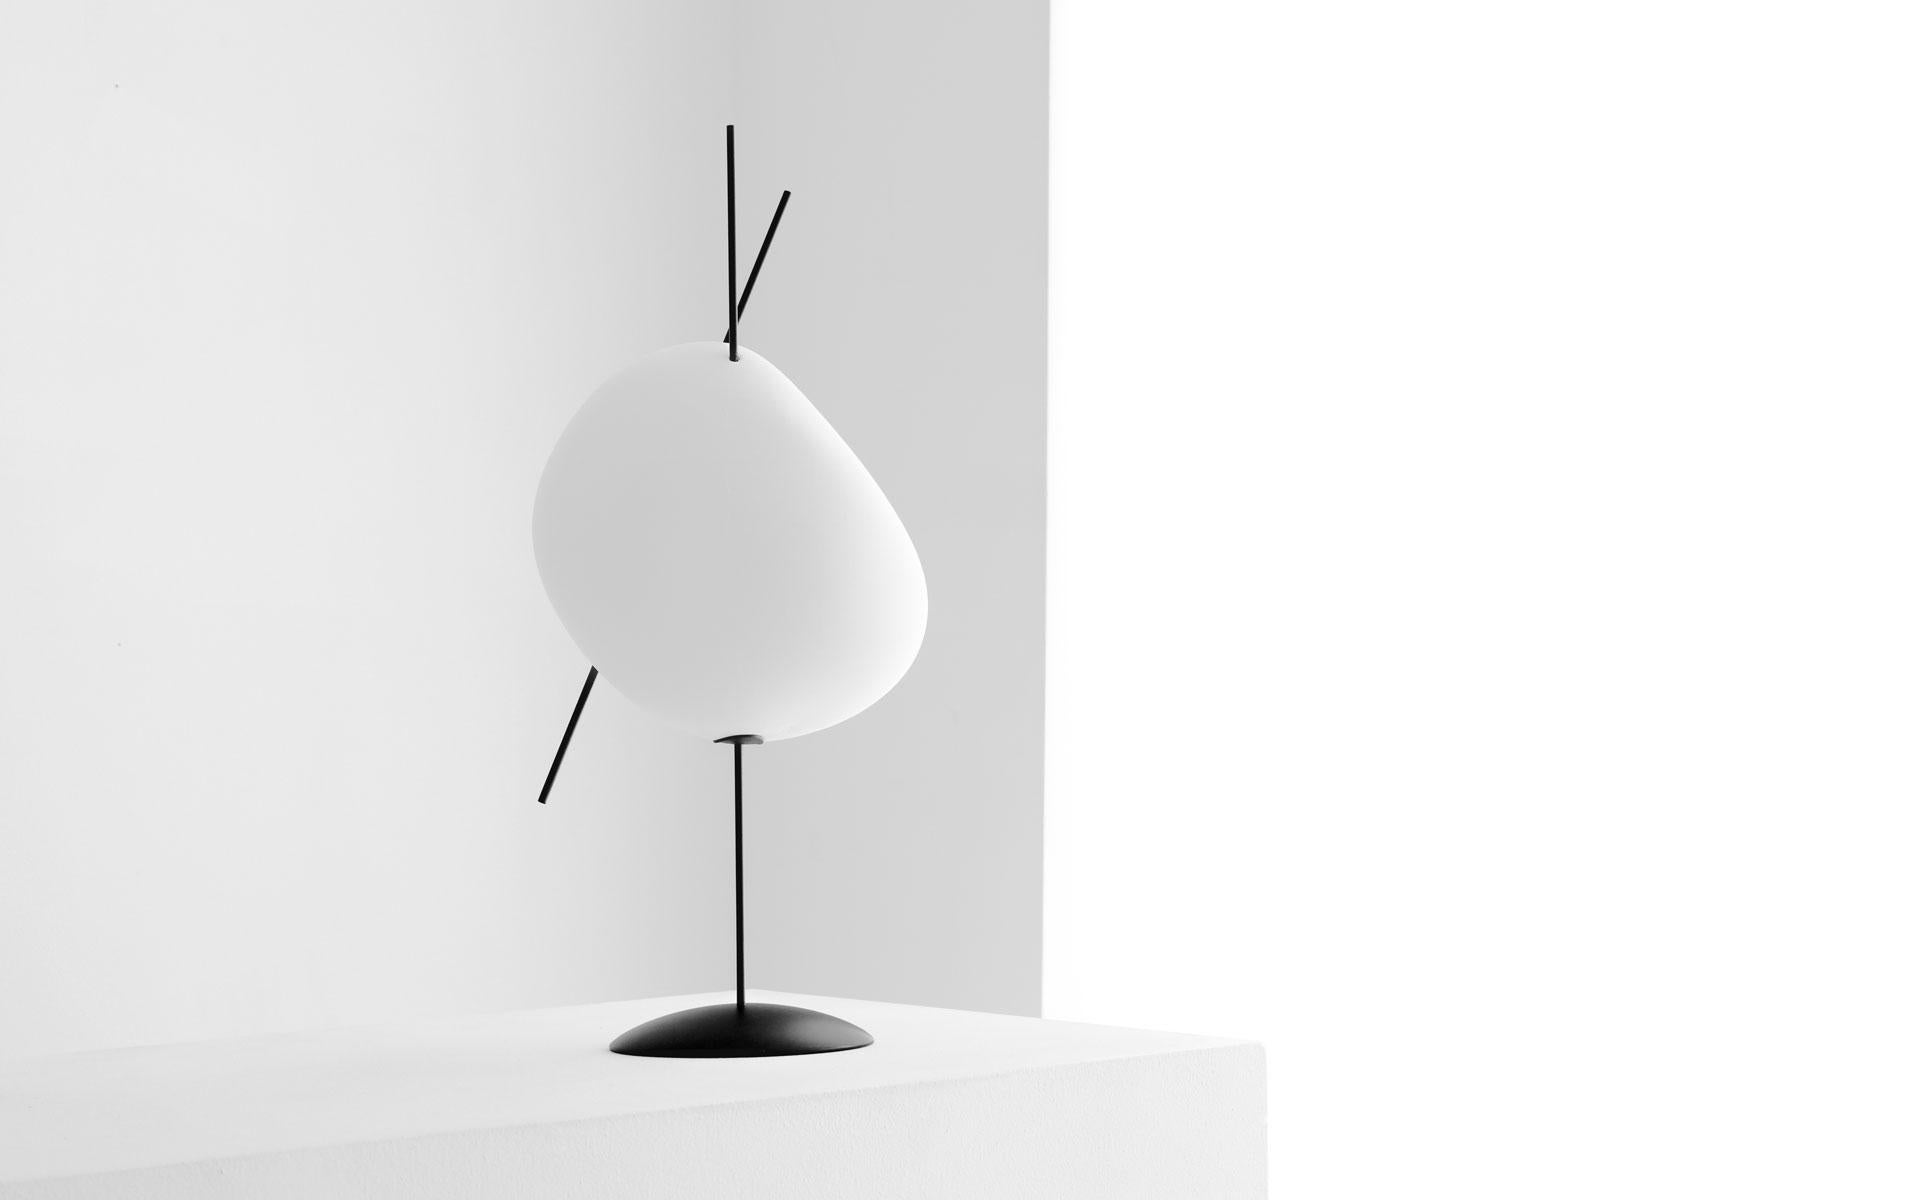 A sculpture by day and a light sculpture by night, “Belle de Nuit” combines the delicacy of the thin metal bars and bisque volumes with the practical and modern lighting technology of a battery powered lamp. 

The choice of materials was crucial